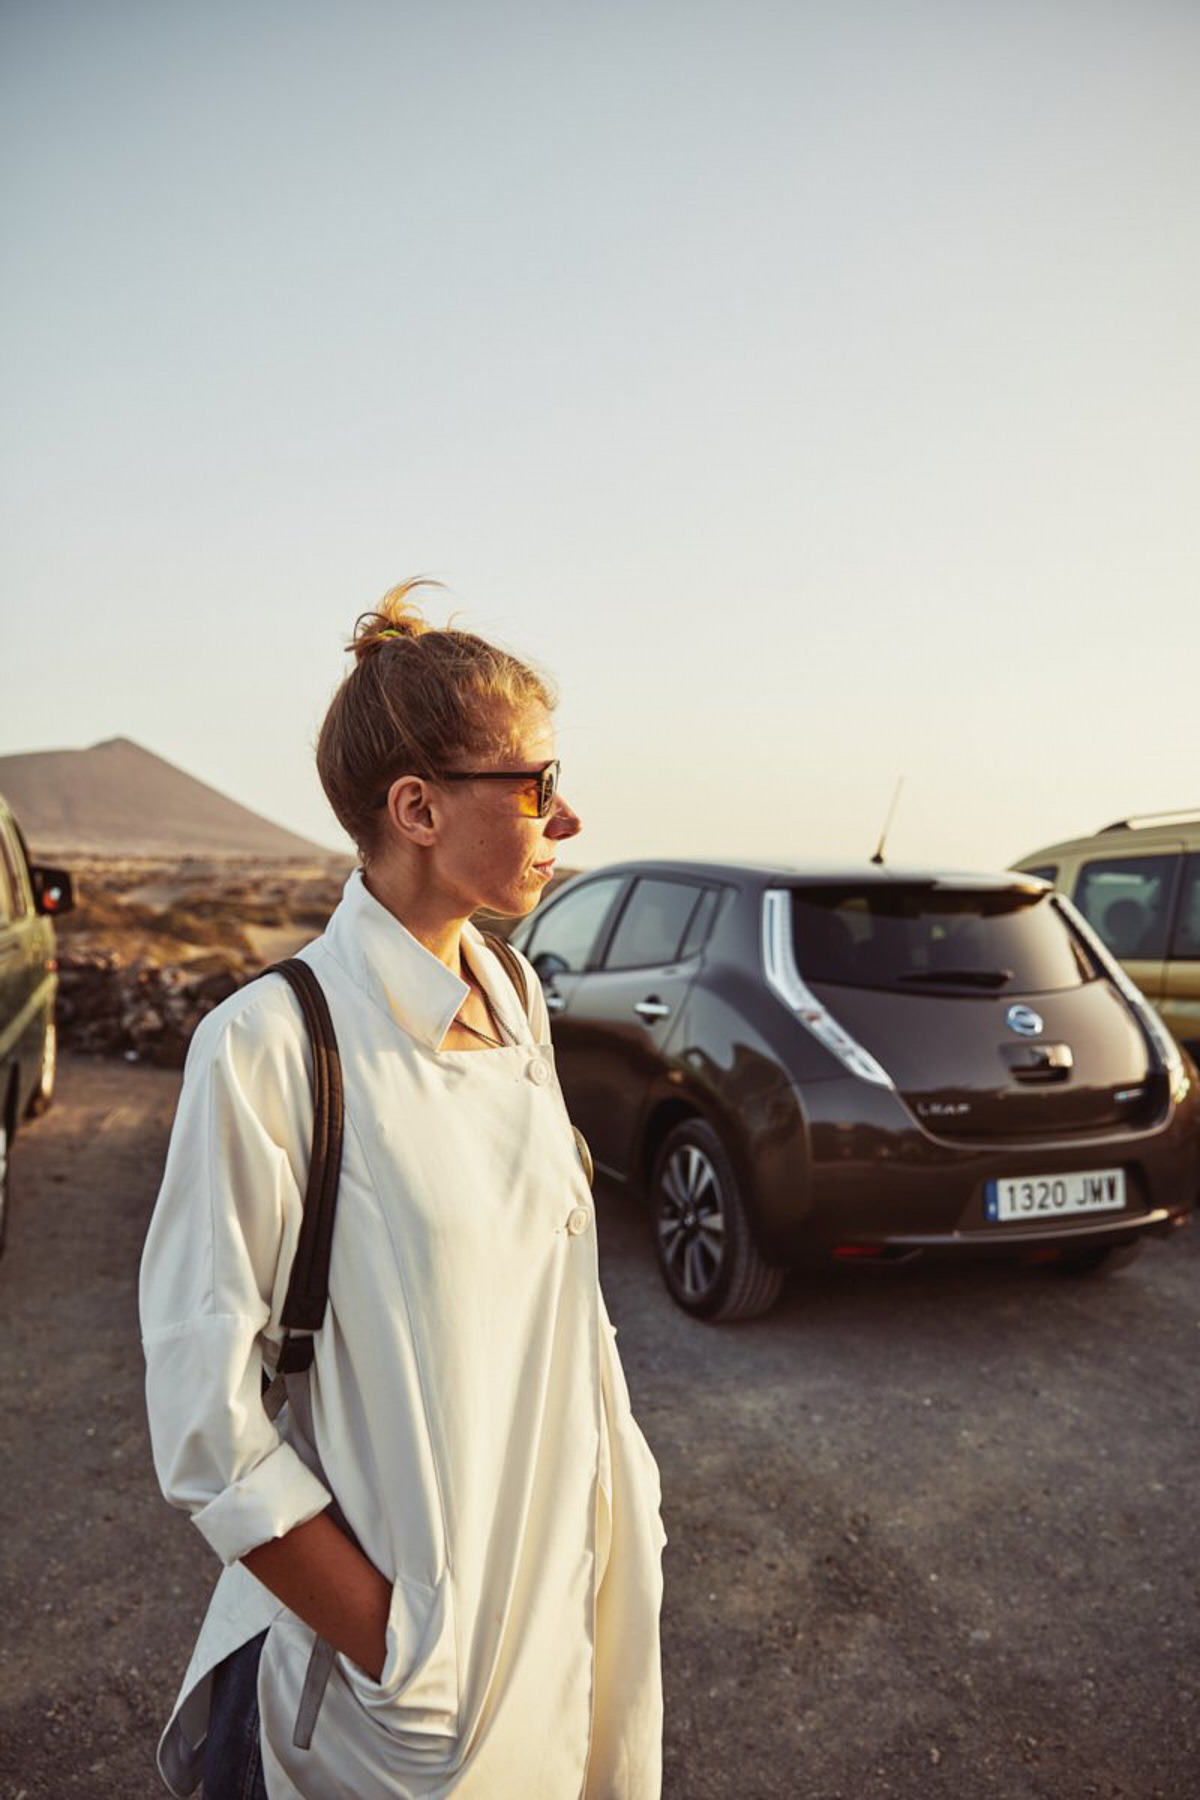 nissan magazine fuerteventura (19 images) by Mike Meyer Photography